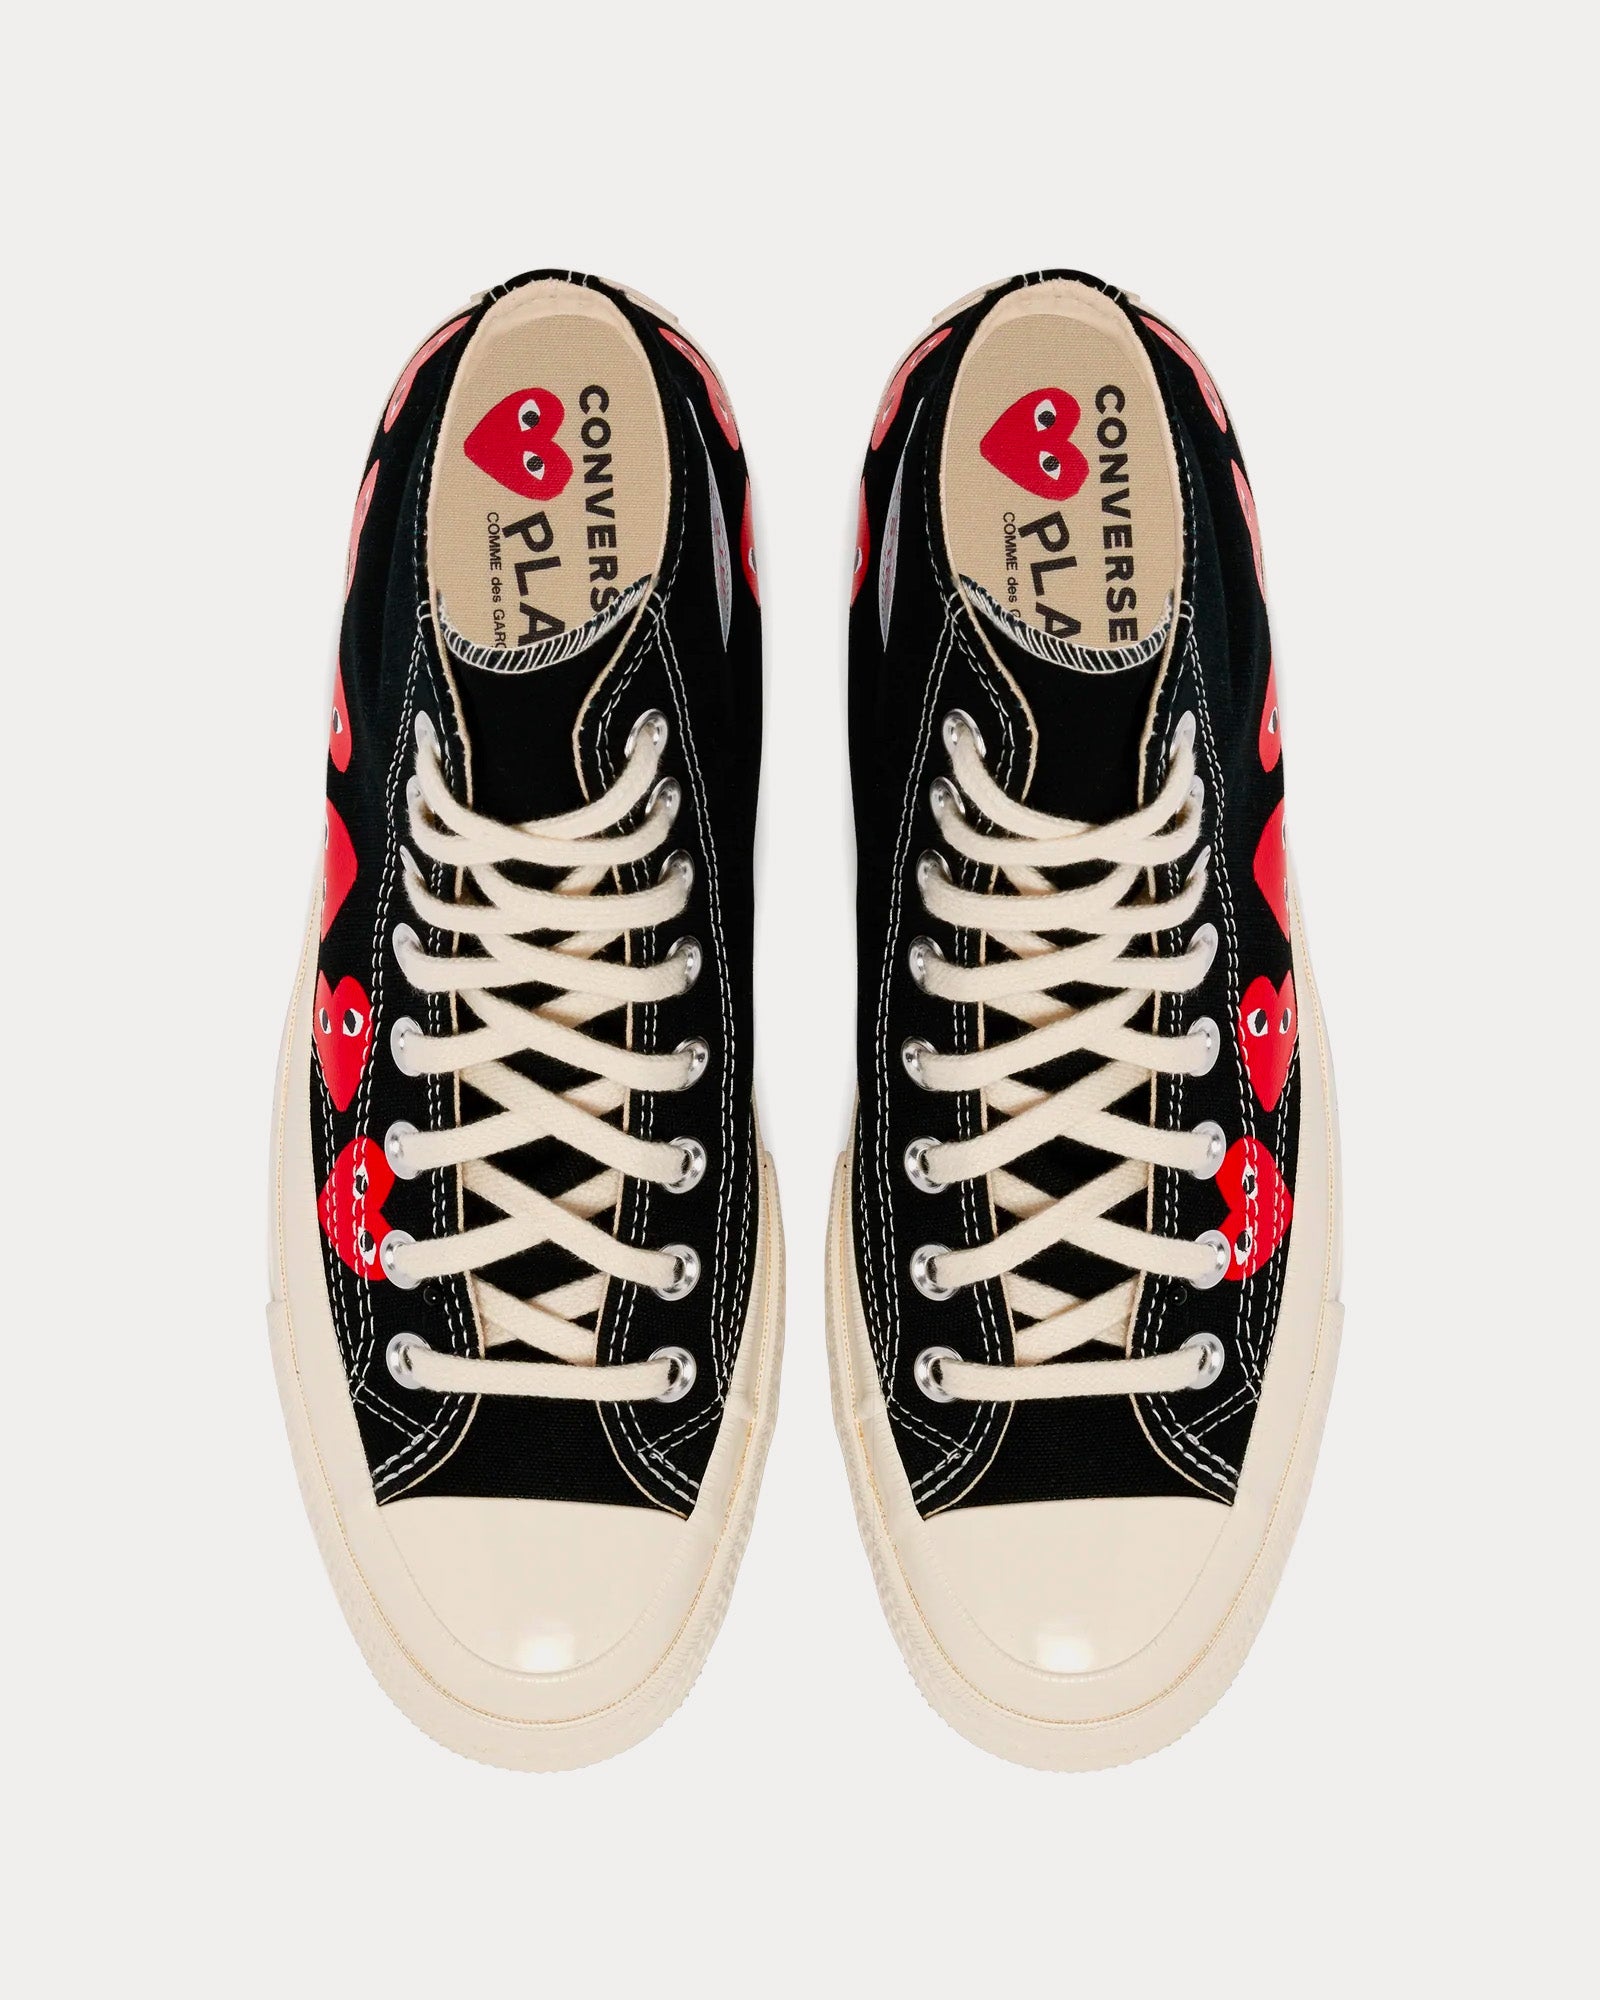 Converse x Comme des Garçons PLAY - Chuck Taylor All Star '70 Multi Heart Black / Red High Top Sneakers